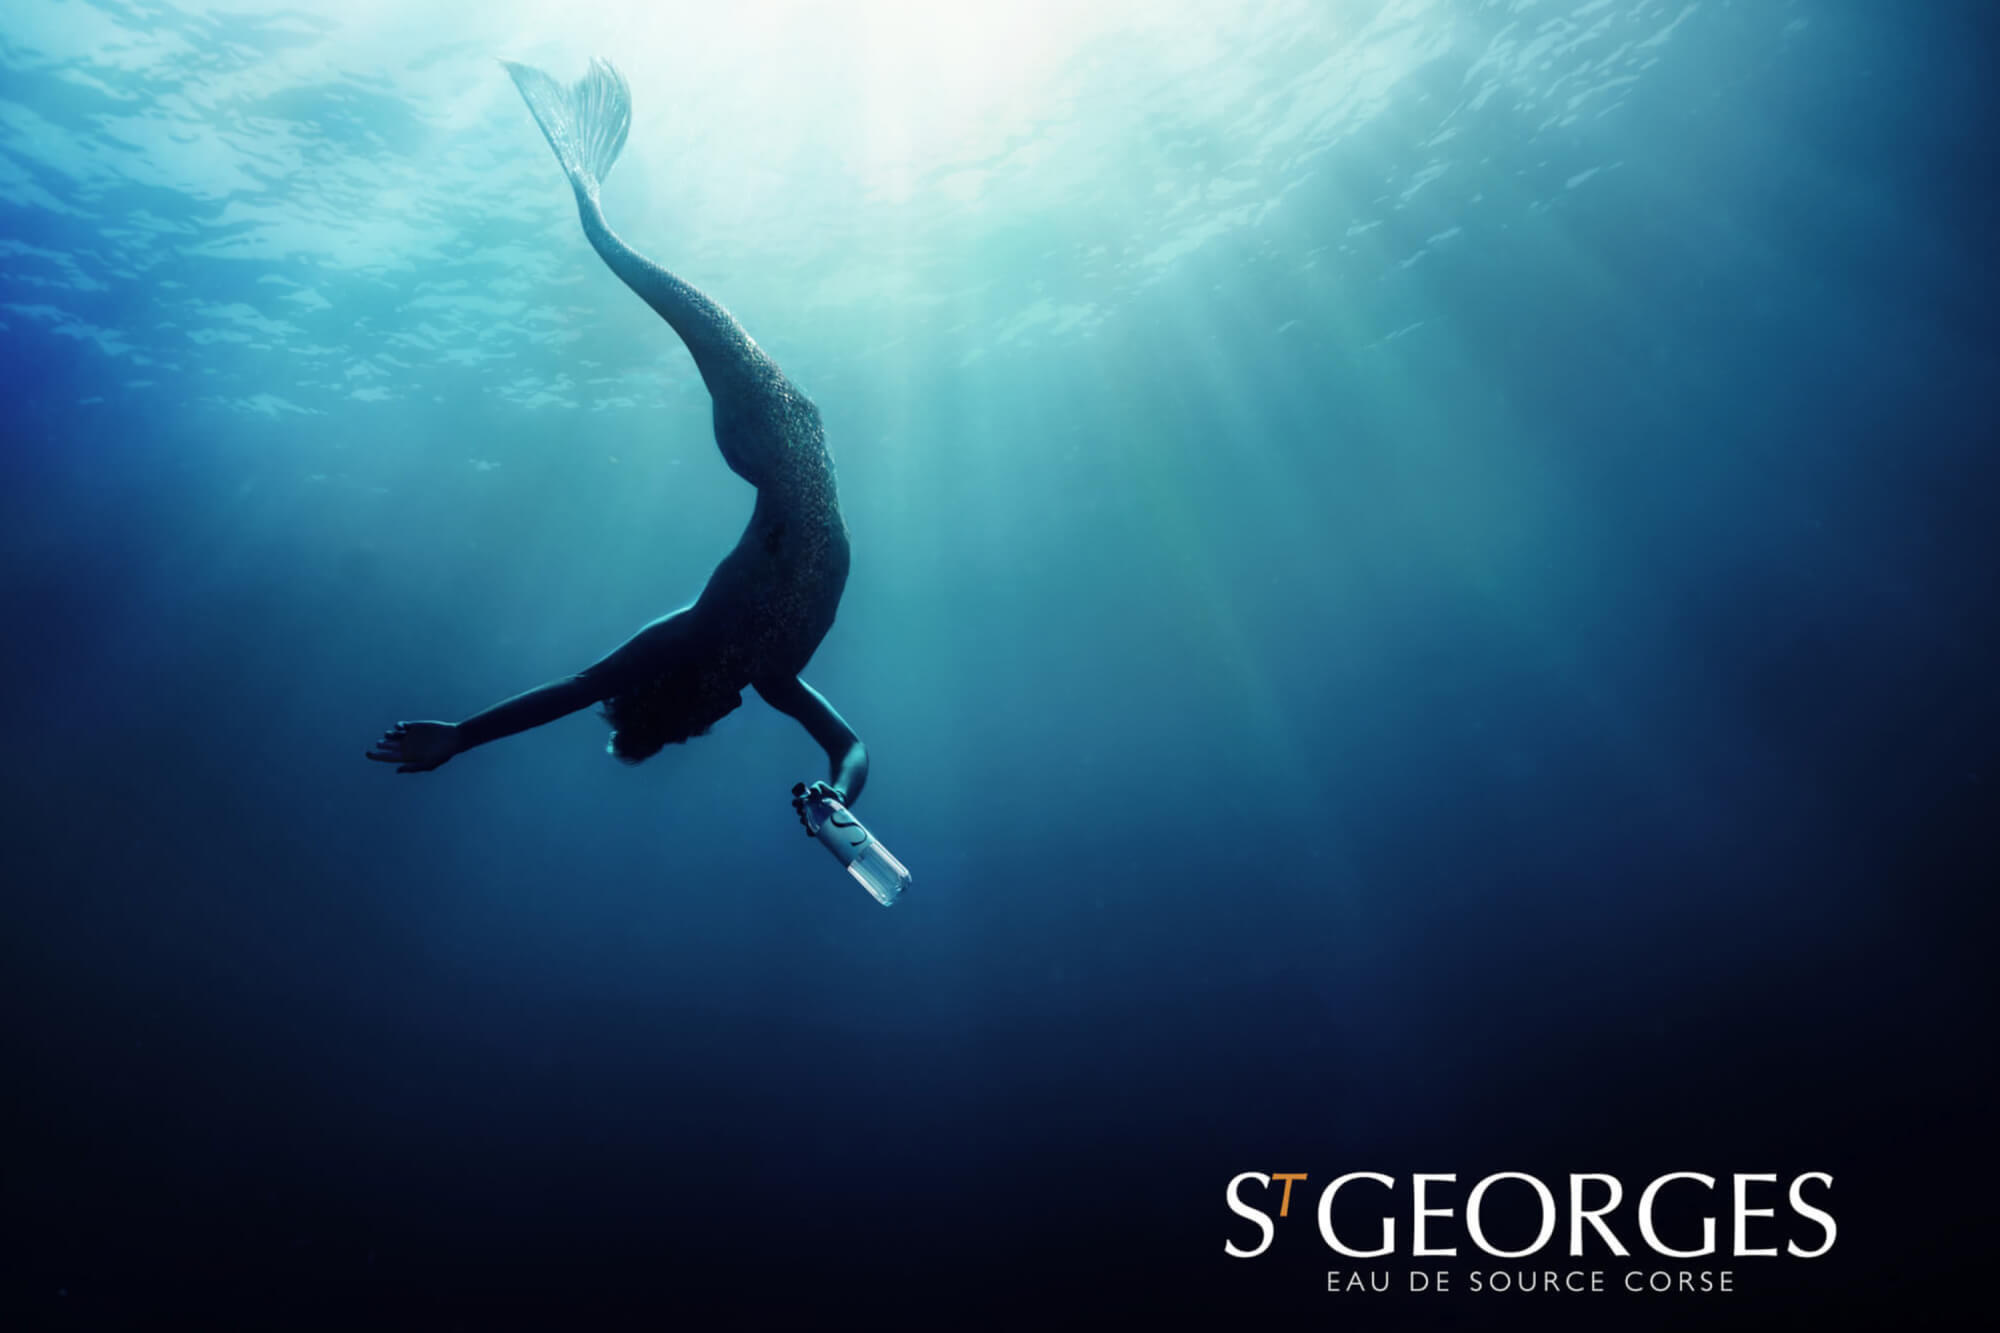 THE NEW VISUAL WATER CAMPAIGN ST GEORGES APPEALS TO INTERNATIONAL DIVE CHAMPIONS IN APNEA AND UNVEILS A POETIC AND TROUBLE MERMAN